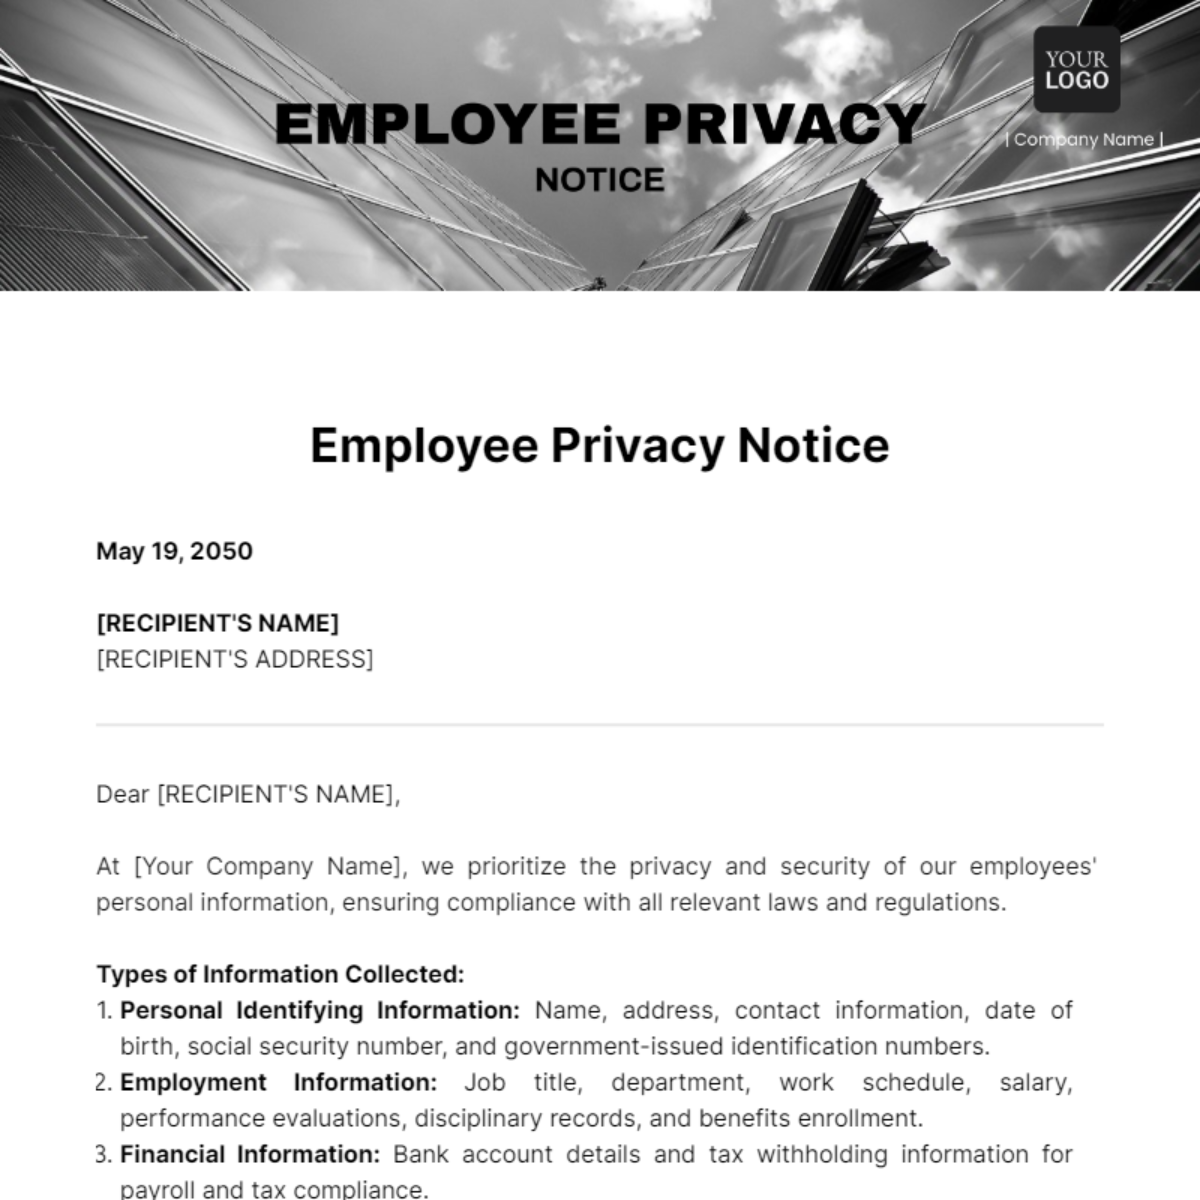 Employee Privacy Notice Template